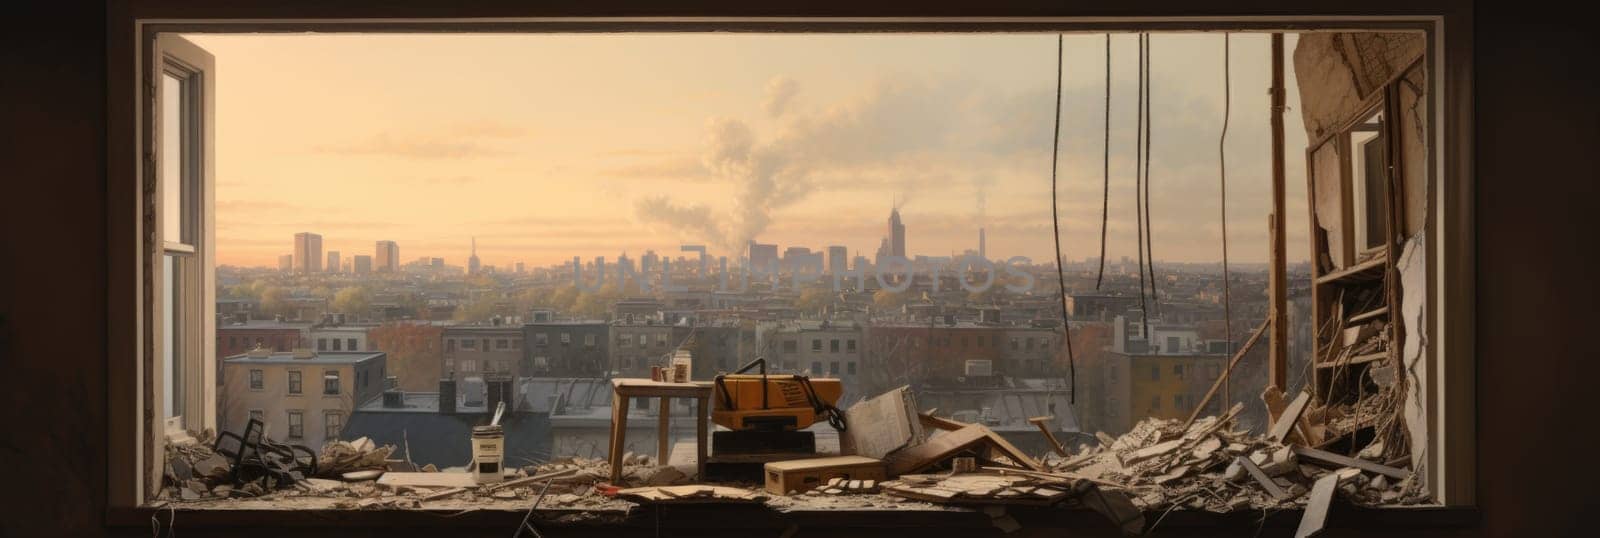 A window provides a view of a cityscape amidst a backdrop of recently demolished houses.